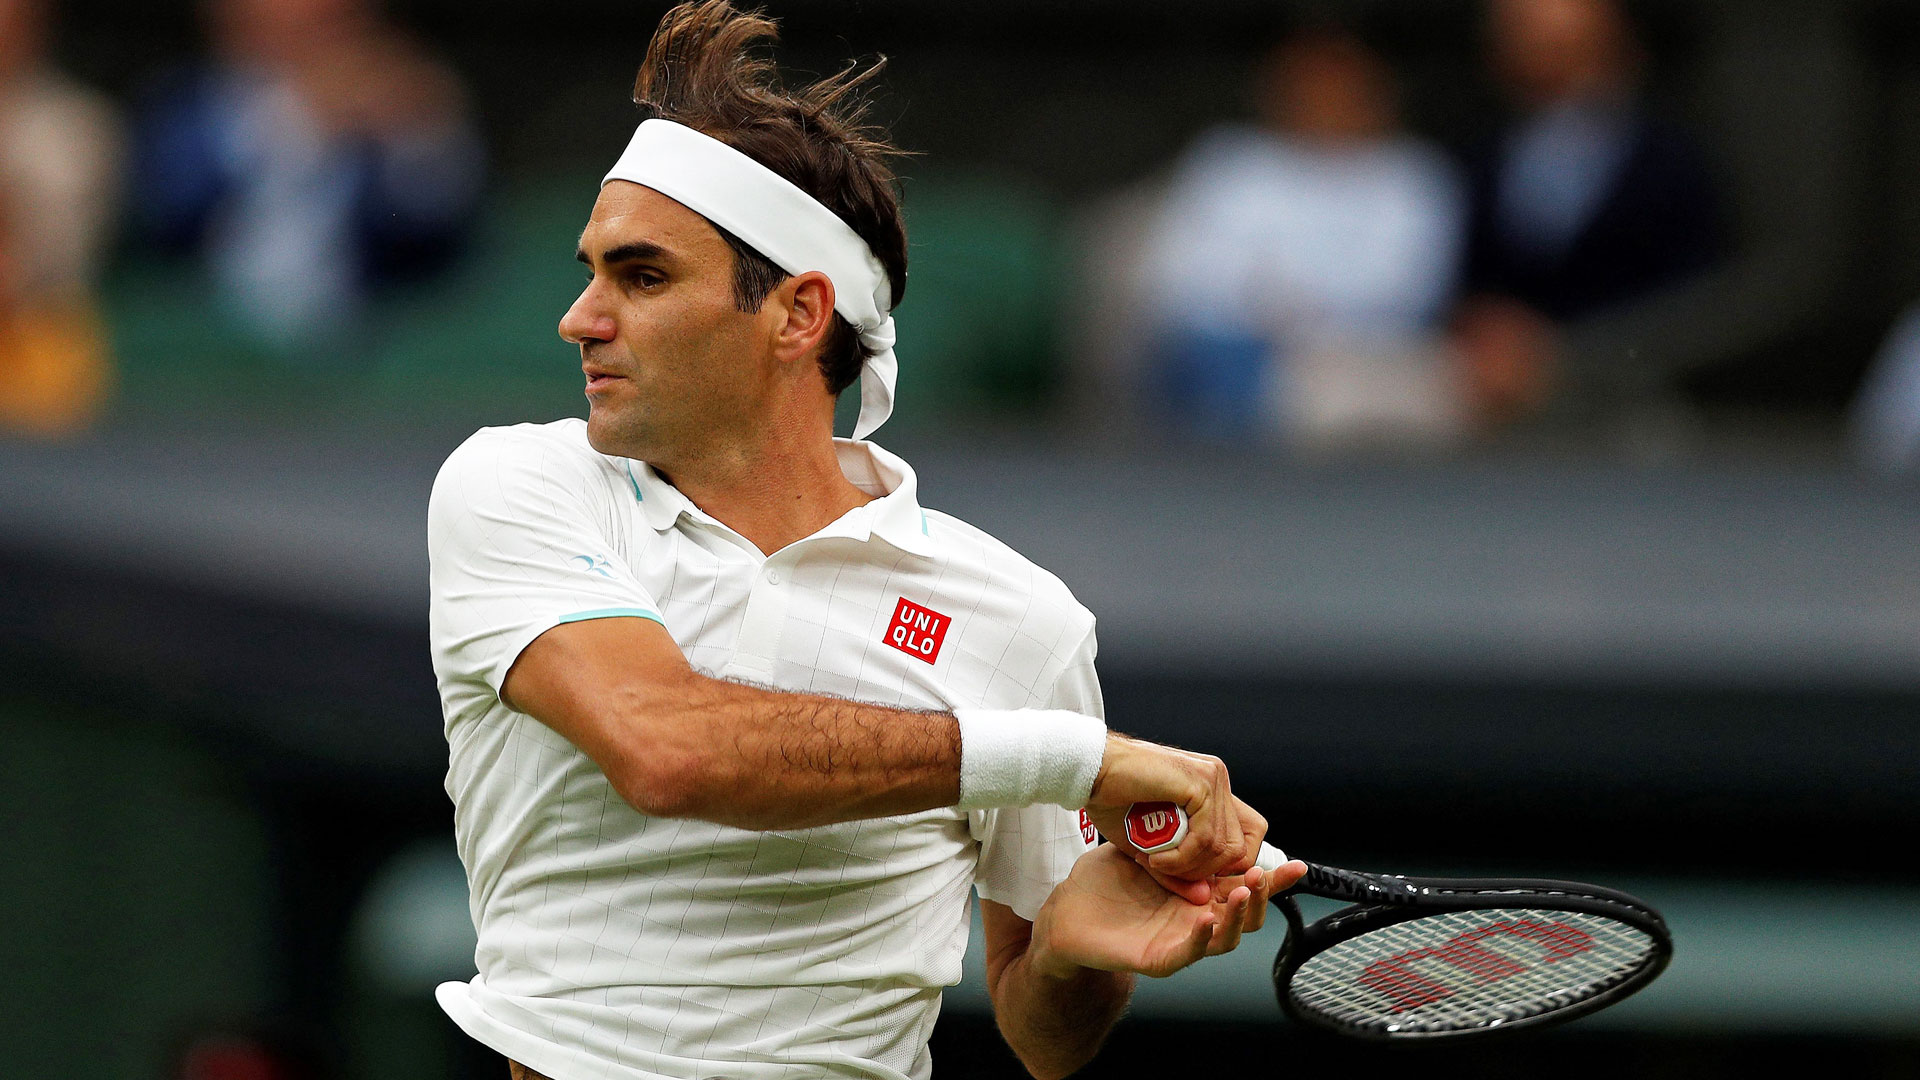 Tennis today 28.07. Match Schedule, Predictions & Betting Tips